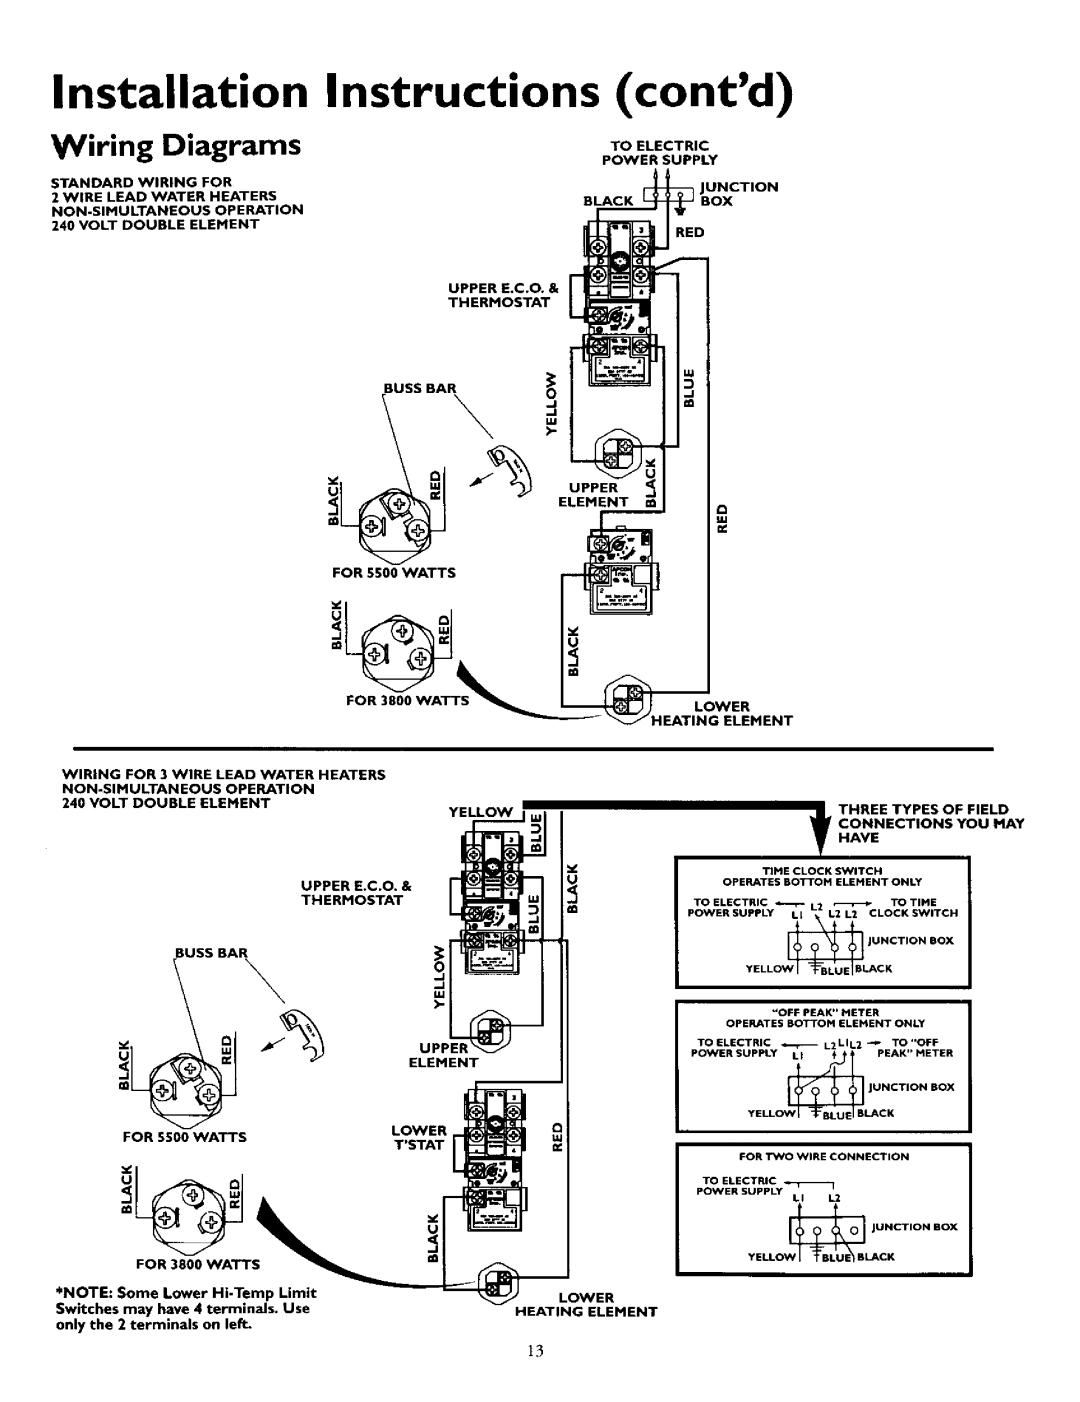 Kenmore 153.320592 HT, 153.320492 HT Wiring Diagrams, Installation Instructions contd, EOR3800W=ENT, FOR 5500 WATTS 